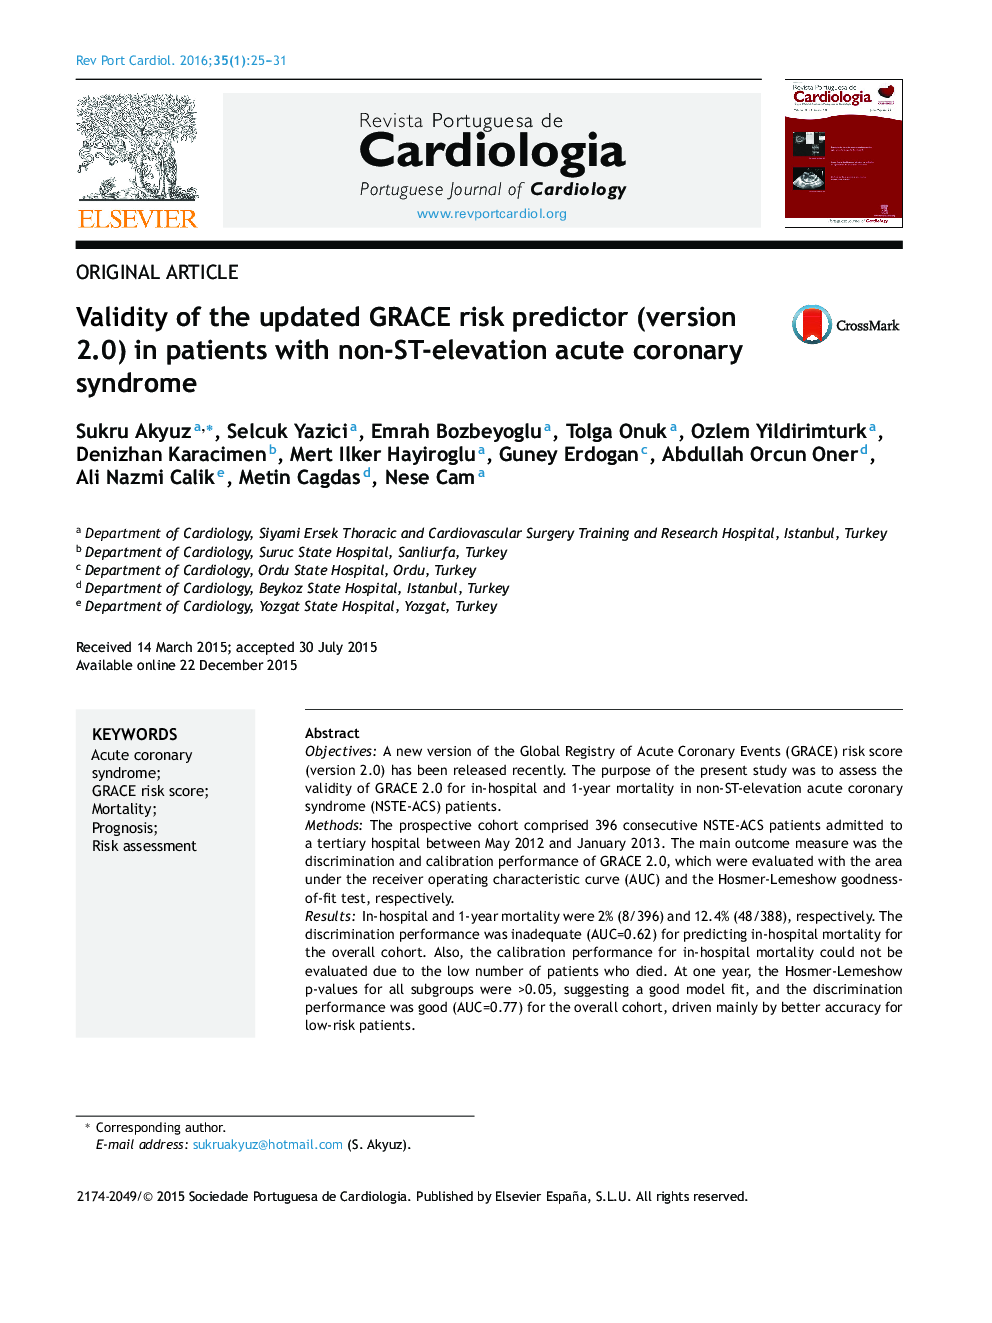 Validity of the updated GRACE risk predictor (version 2.0) in patients with non-ST-elevation acute coronary syndrome